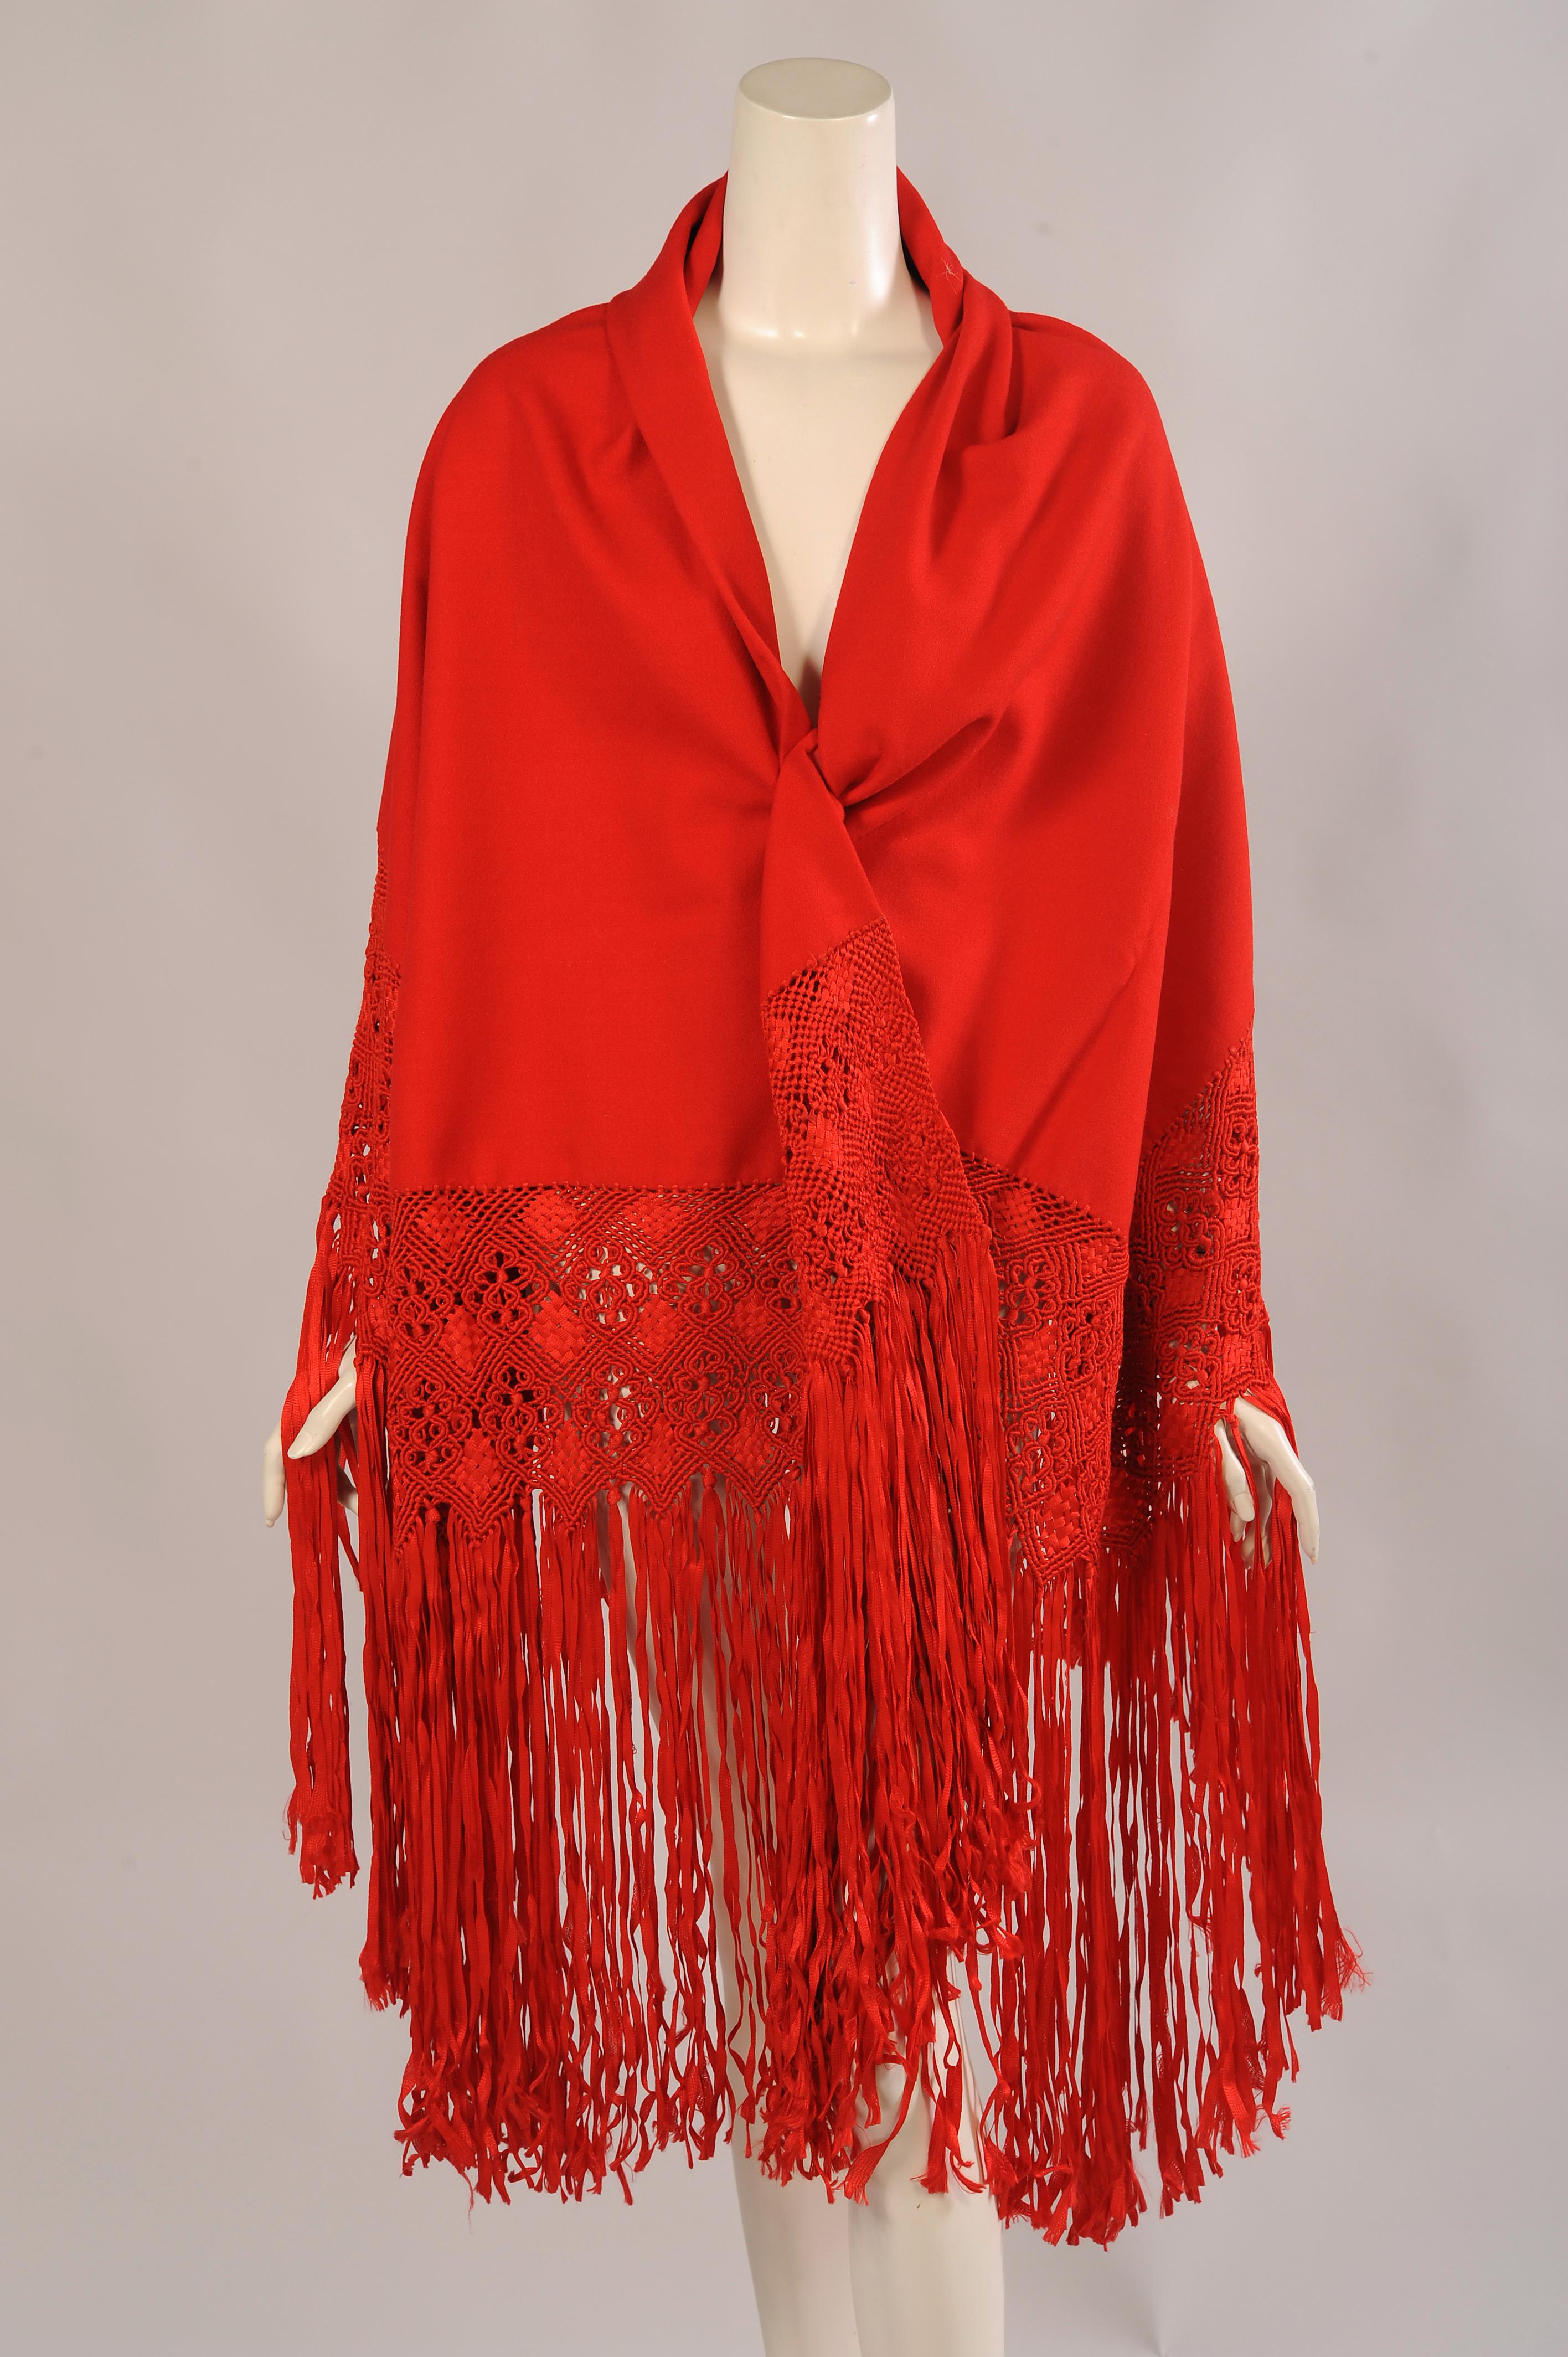 This shawl is so beautiful! A large square of red wool crepe is folded in half for extra body and warmth. It is then lavishly trimmed with red silk macrame work and fringe. All of this is done by hand and it is quire spectacular. There are braided,